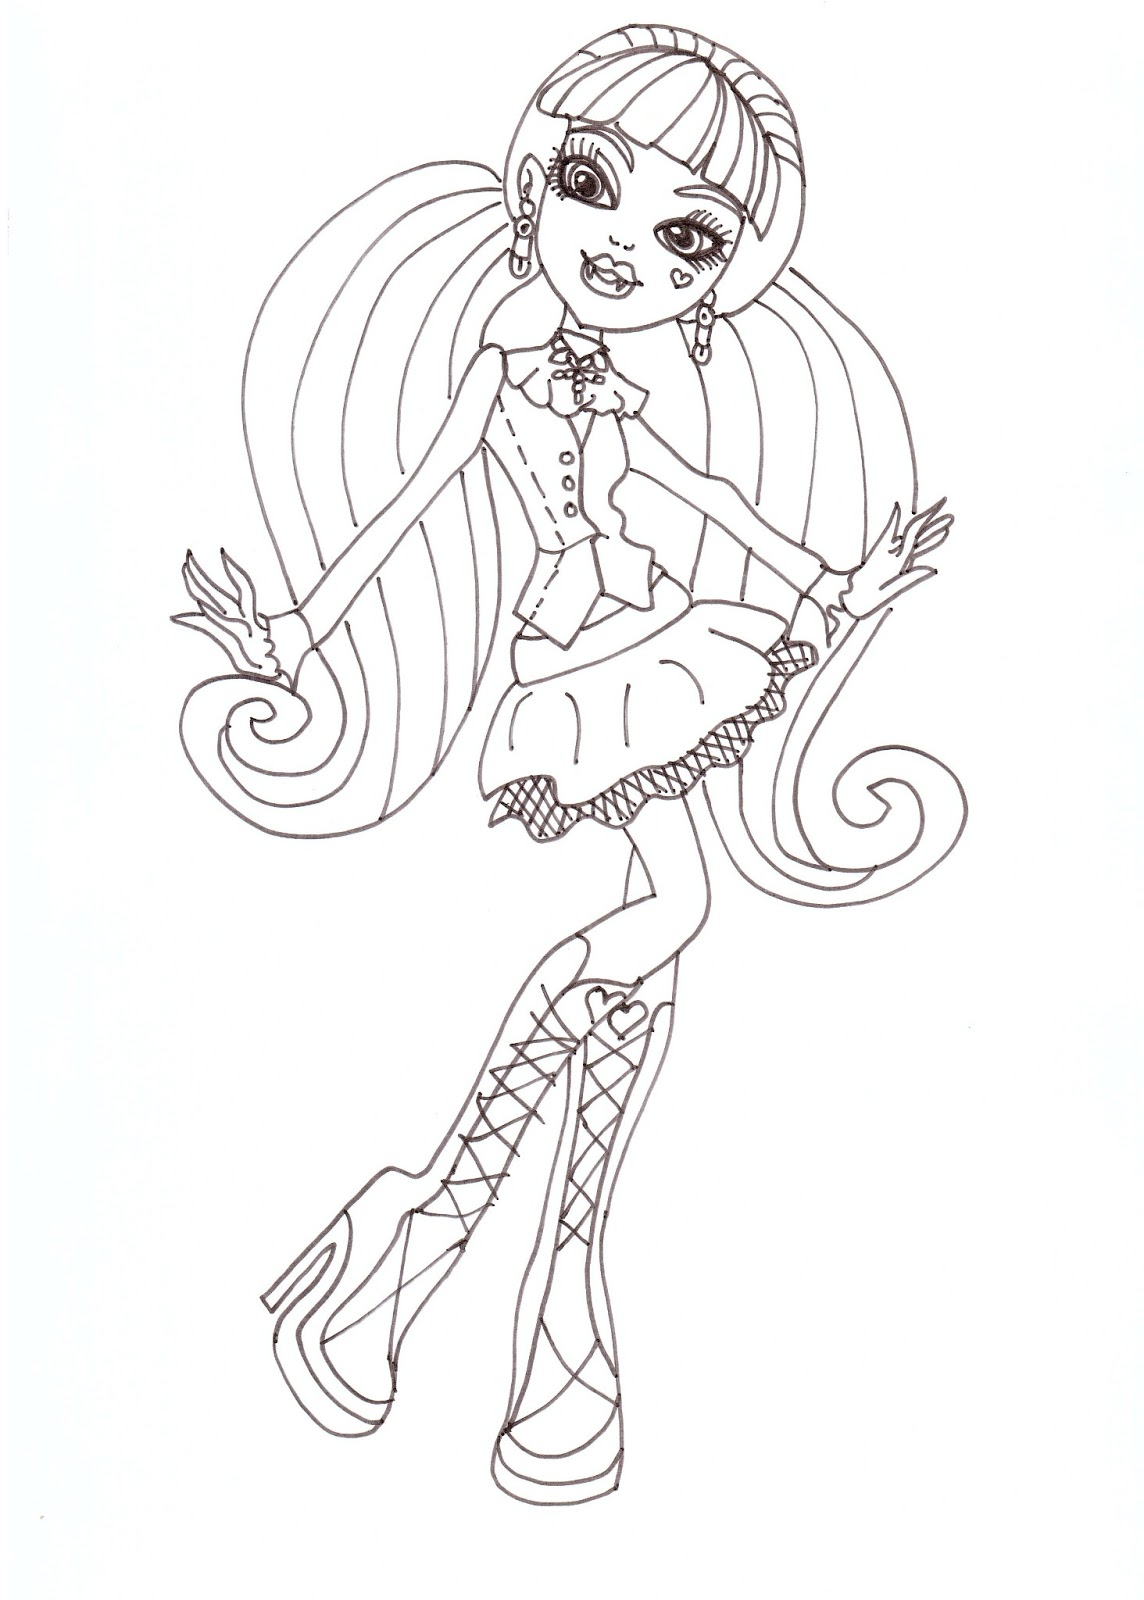 Monster High Draculaura Coloring Pages at GetColorings.com | Free